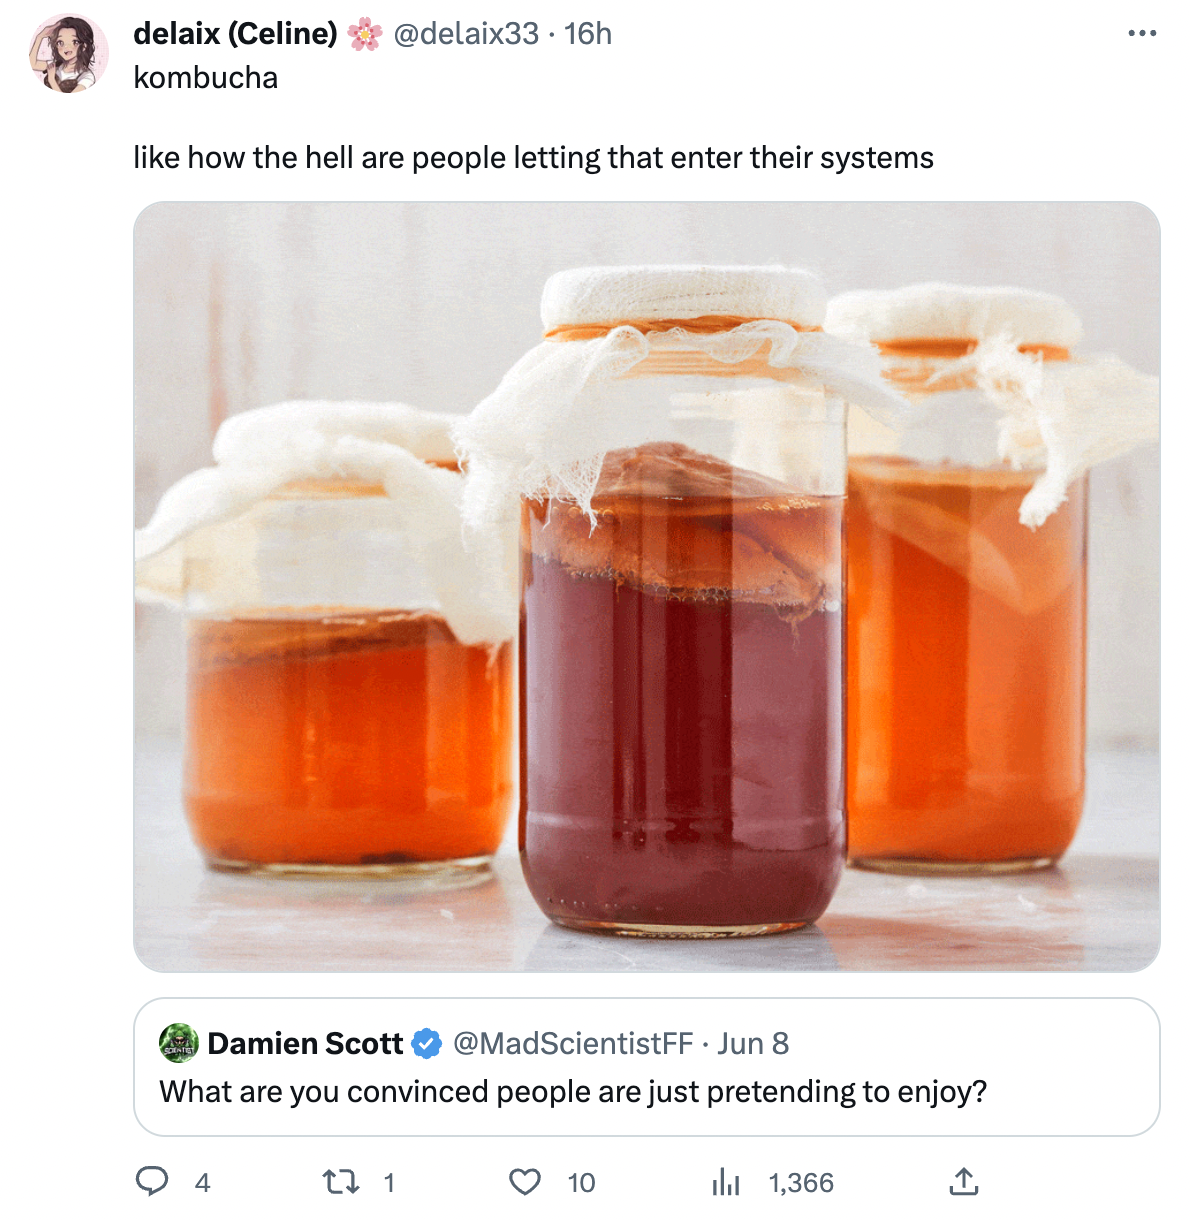 fruit preserve - kombucha how the hell are people letting that enter their systems Damien Scott . Jun 8 What are you convinced people are just pretending to enjoy? 12 1 10 1,366 ...